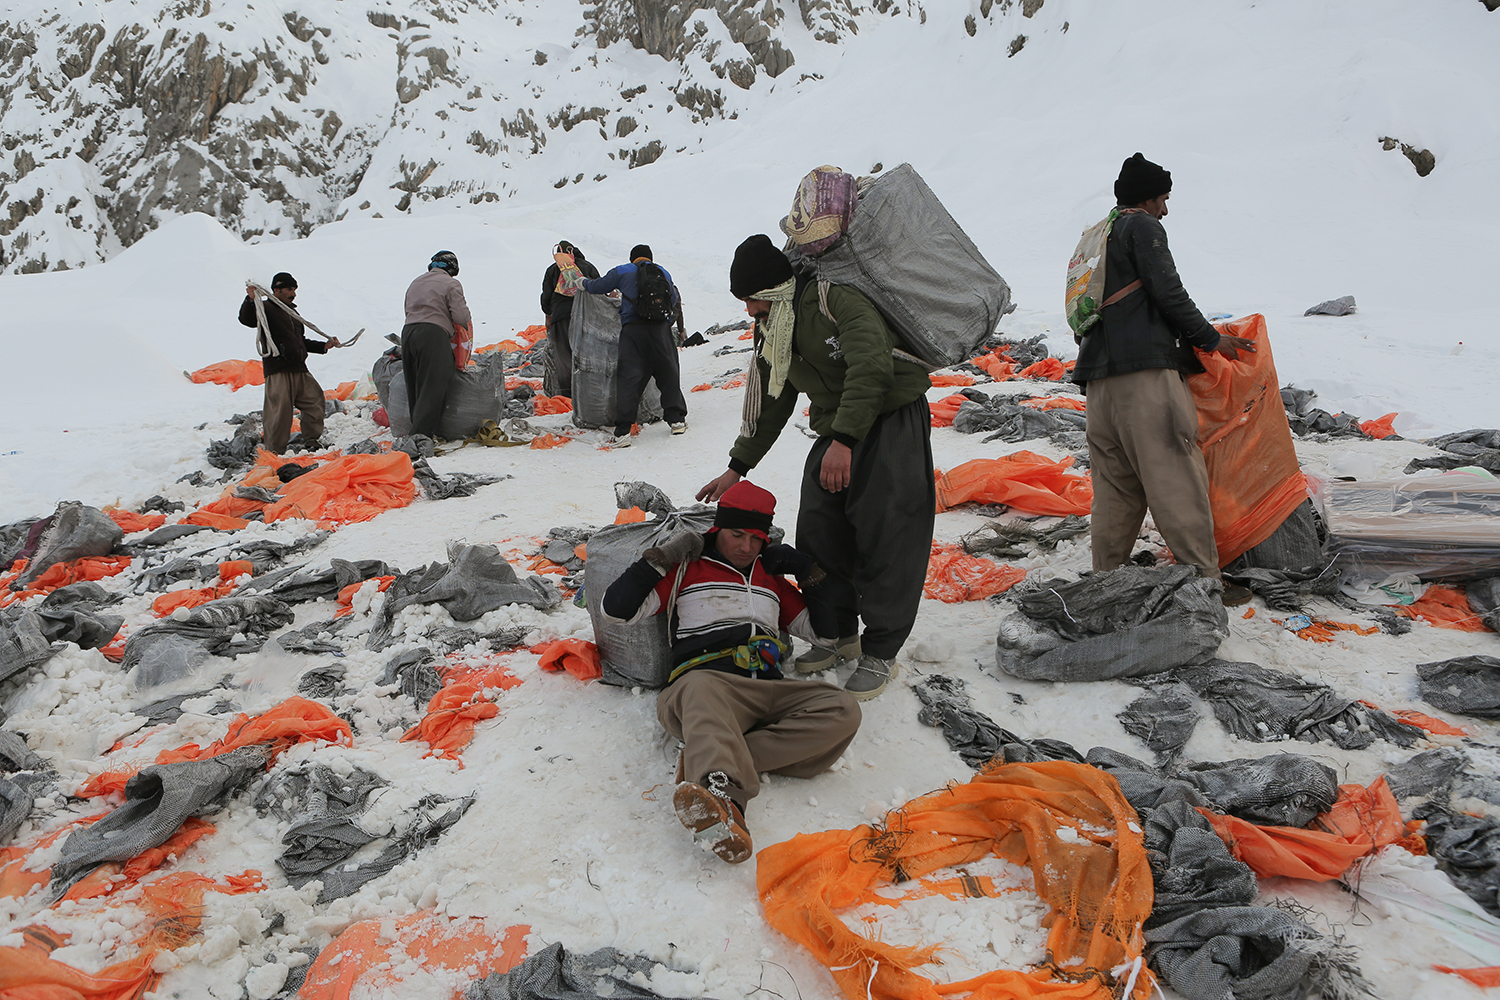 Packs and orange plastic is strewn on the snow-covered ground. Men busy themselves (photo: Konstantin Novakovic)